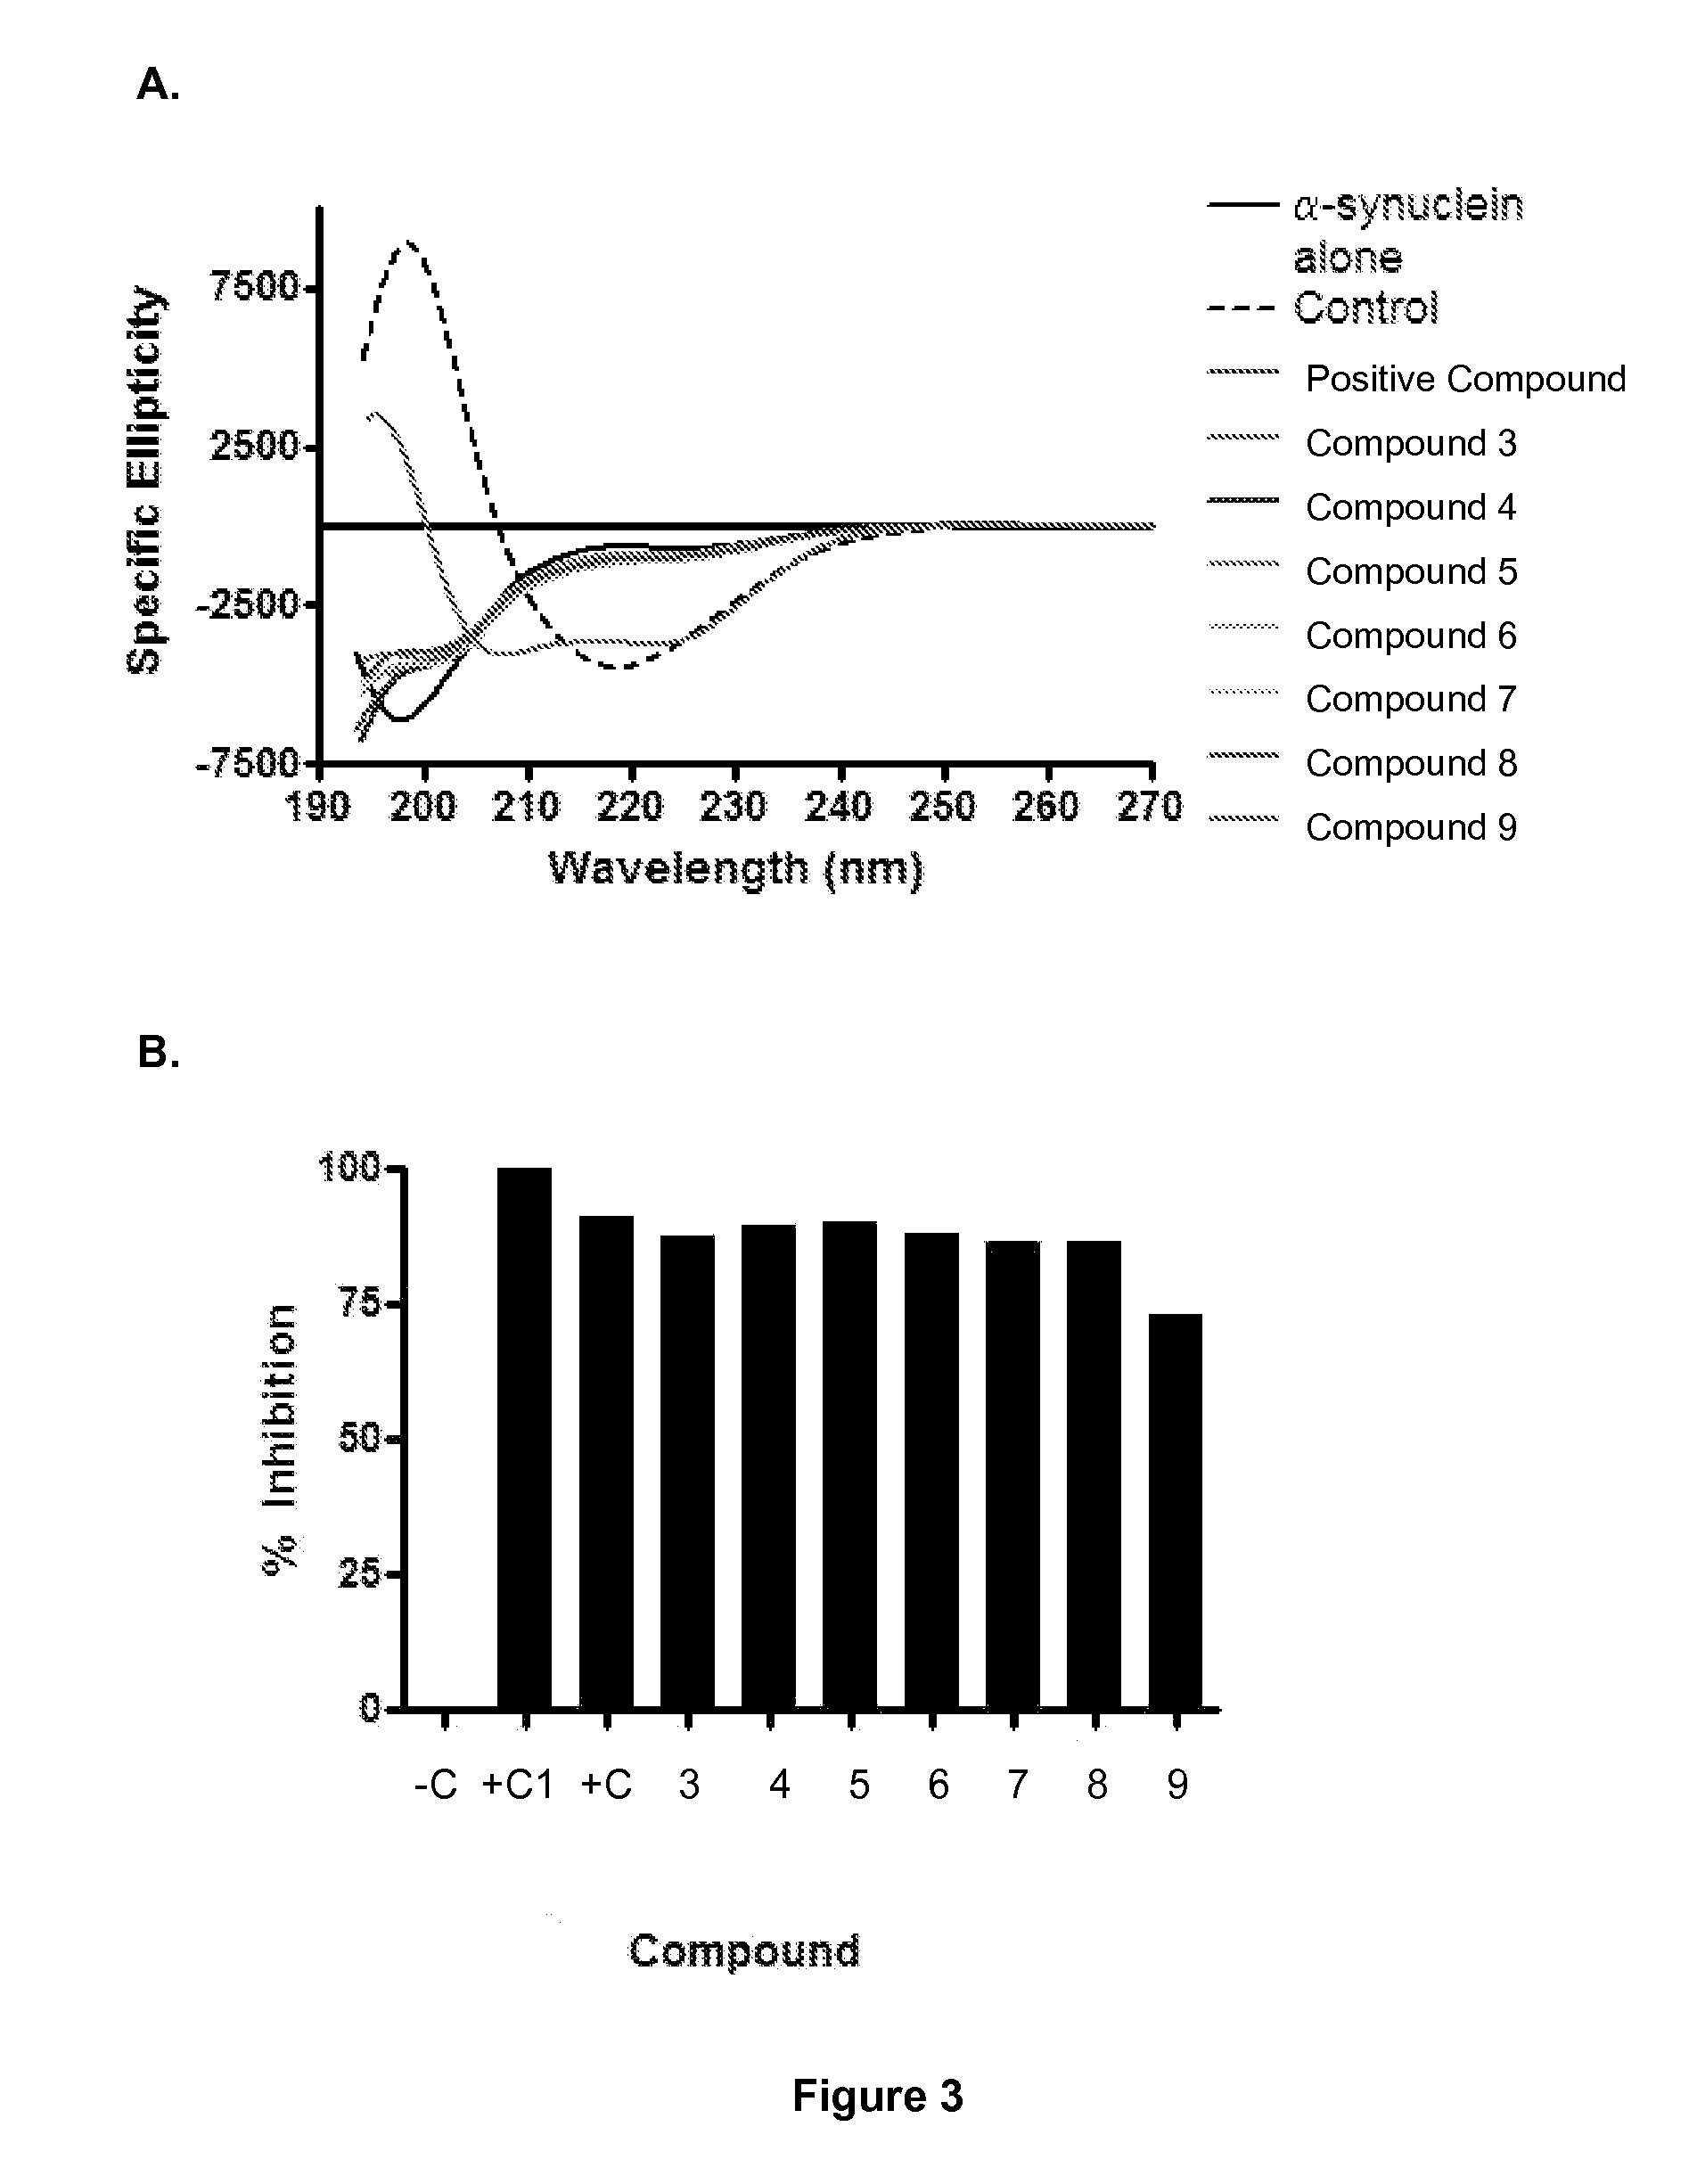 Compounds, compositions, and methods for the treatment of beta-amyloid diseases and synucleinopathies